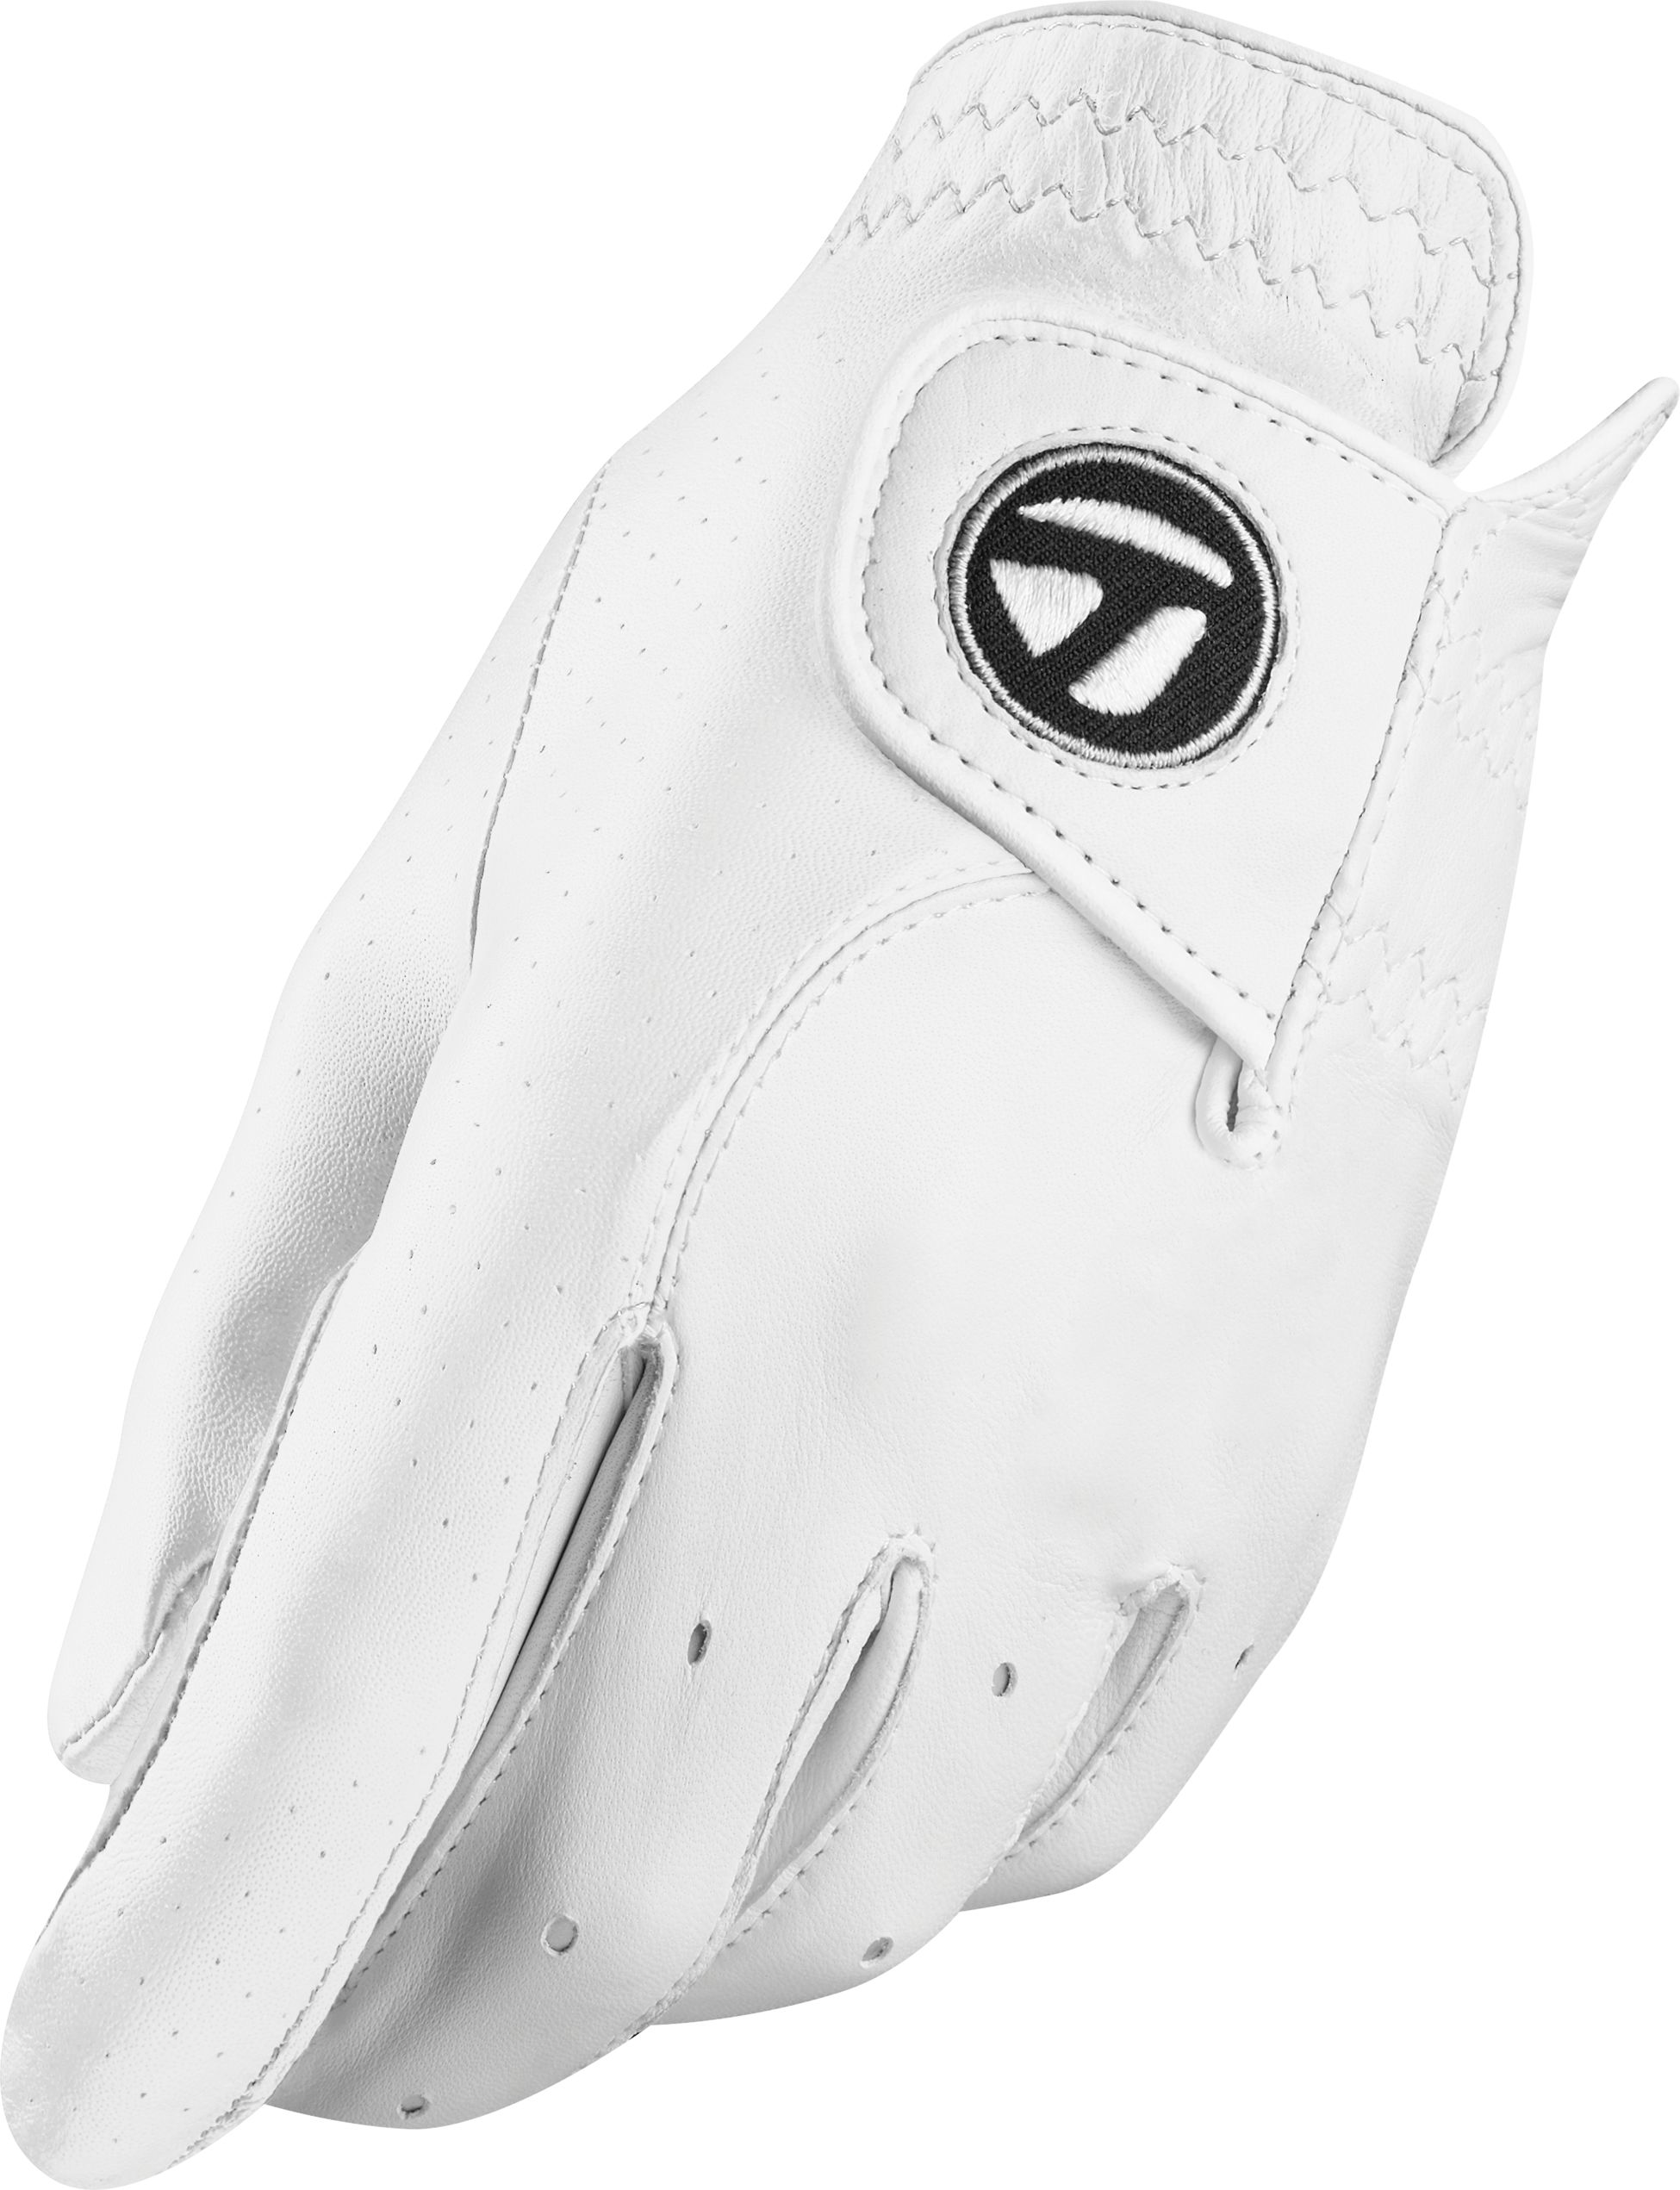 TAYLOR MADE, TOUR PREFERRED LH GL